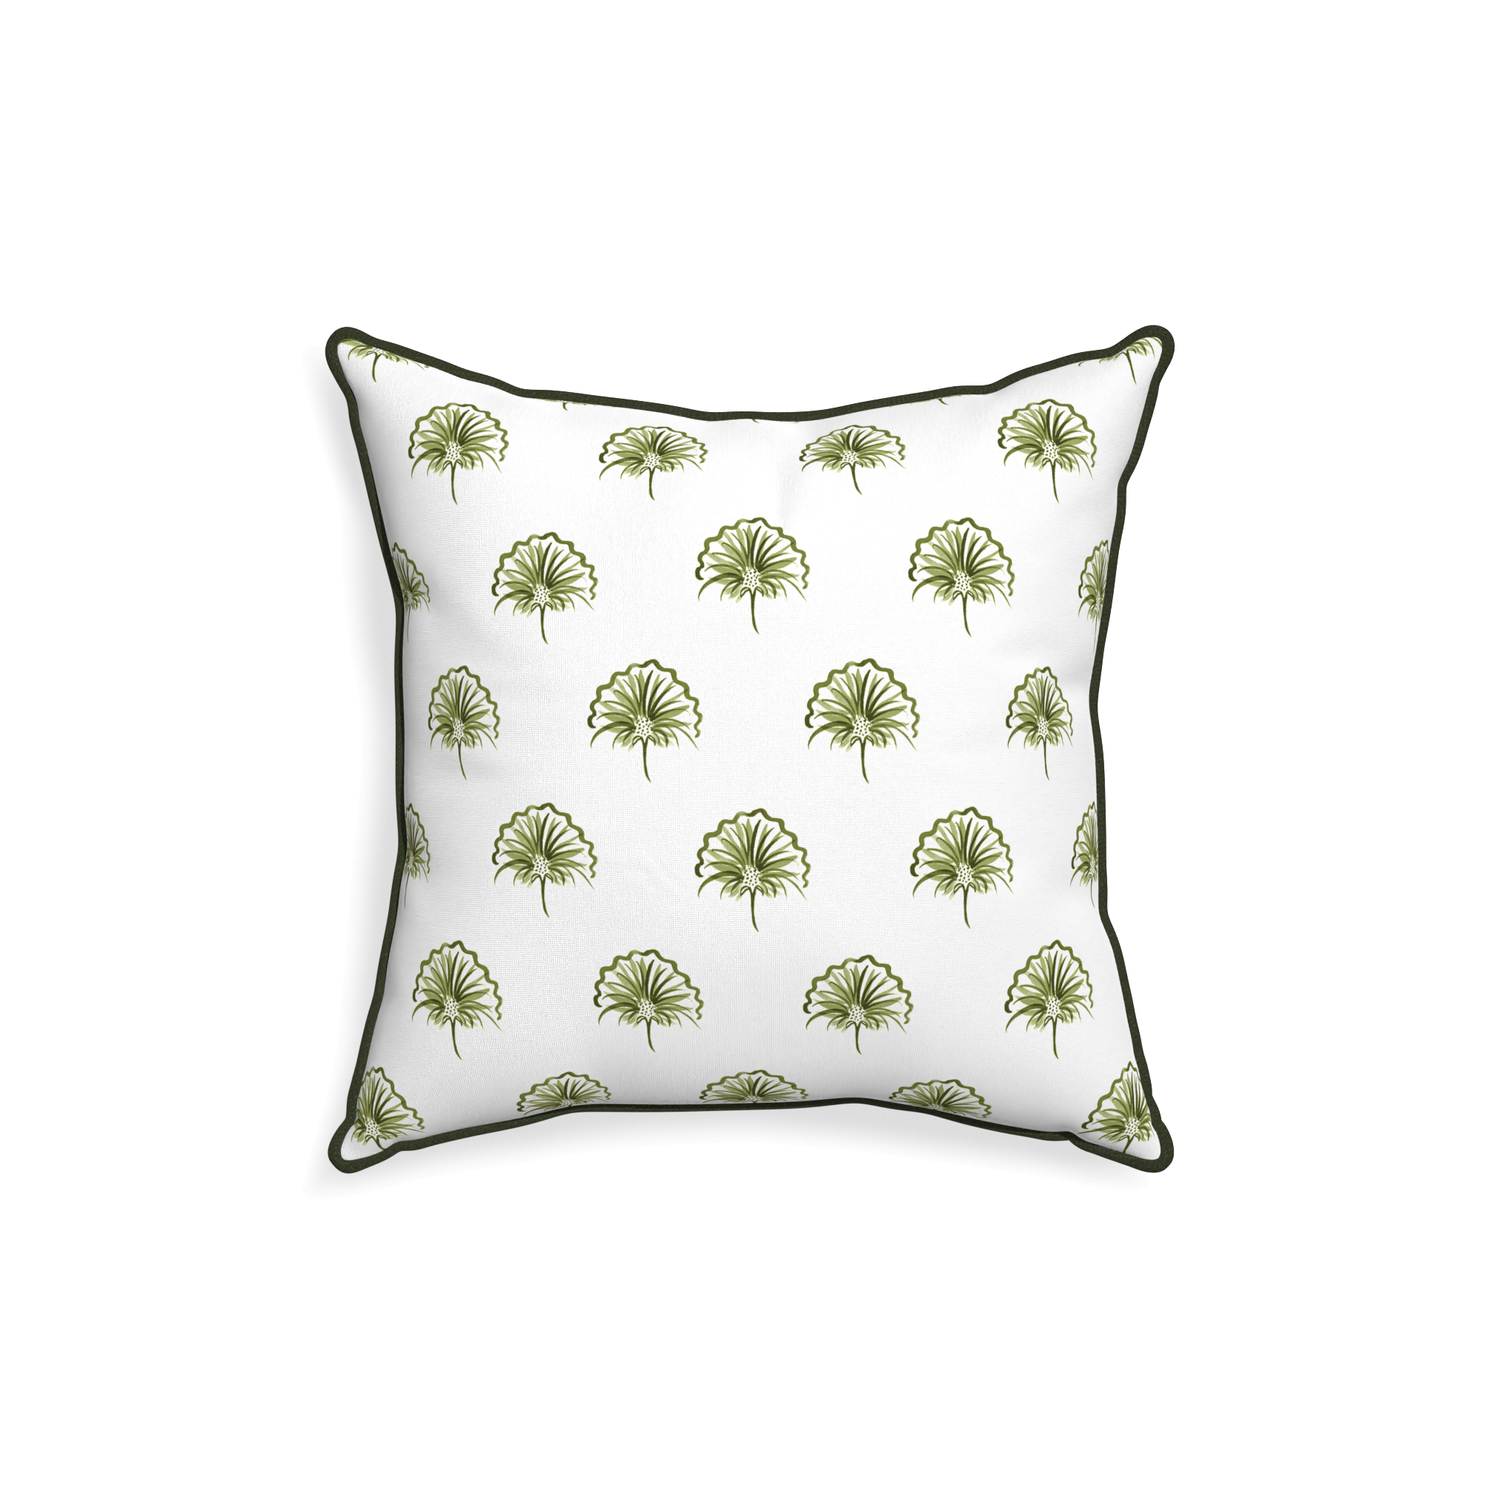 18-square penelope moss custom green floralpillow with f piping on white background